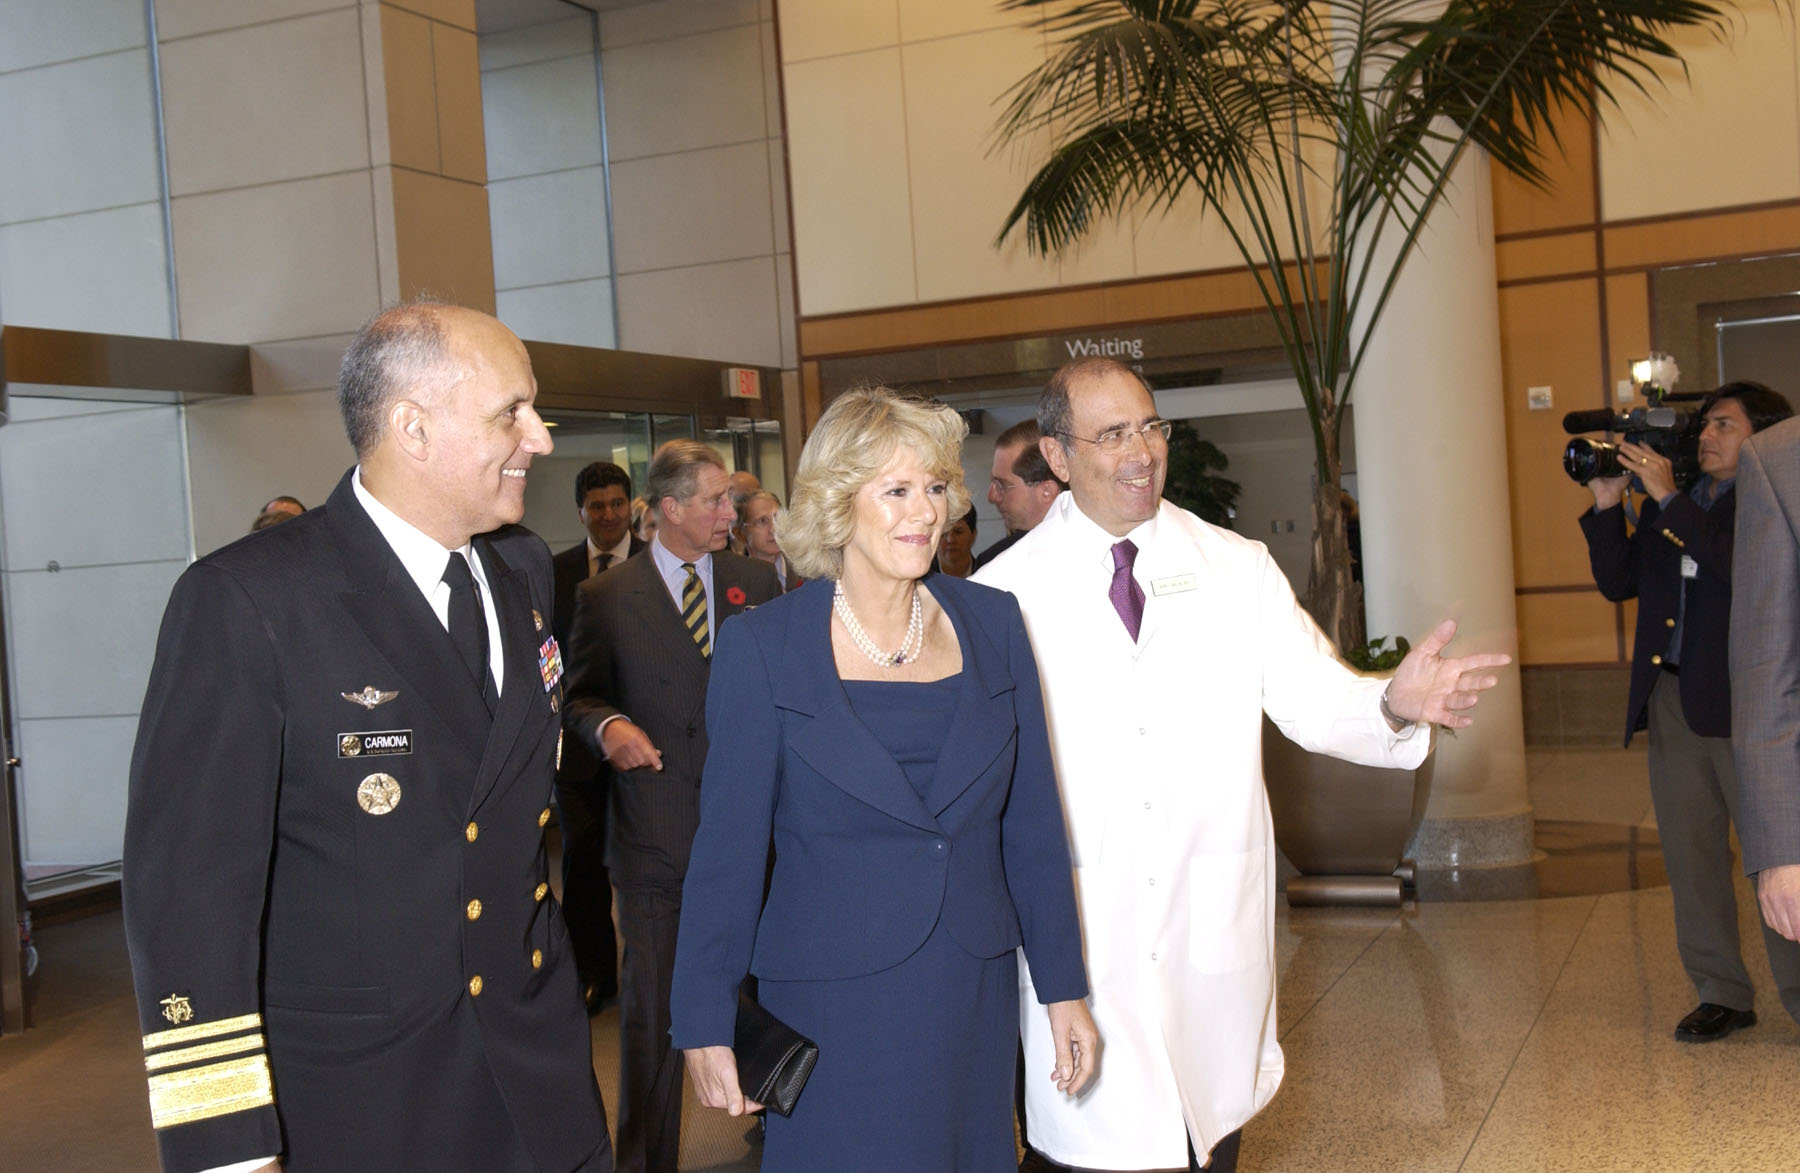 The Duchess of Cornwall, followed by the Prince of Wales, is welcomed to the Clinical Center by Surgeon General Richard H. Carmona (left) and CC Director John I. Gallin (right).